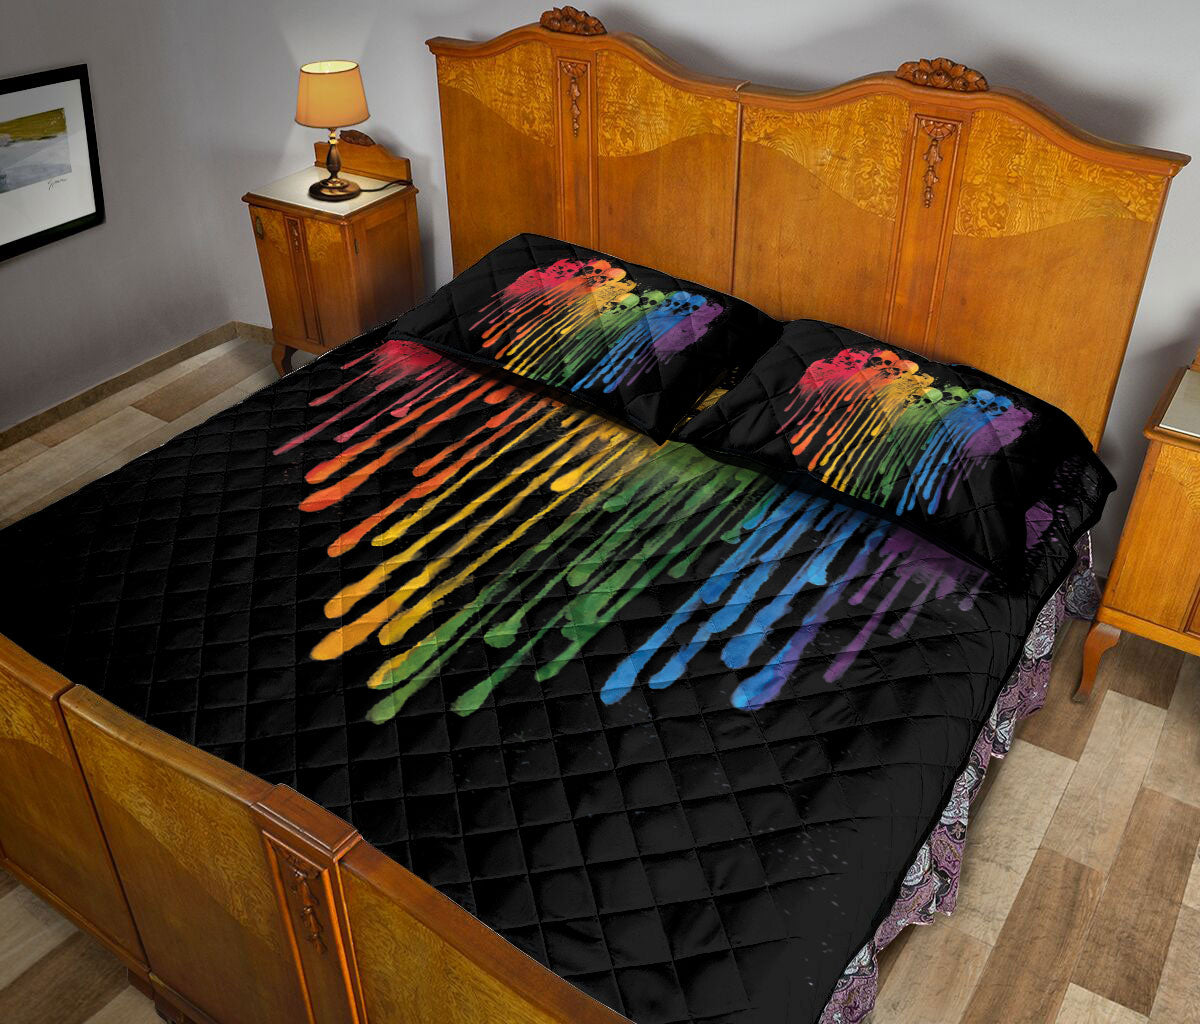 Ohaprints-Quilt-Bed-Set-Pillowcase-Lgbtq-Lgbt-Skull-Heart-Pride-Rainbow-Flag-Love-Wins-Love-Is-Love-Pride-Month-Blanket-Bedspread-Bedding-1467-Queen (80'' x 90'')